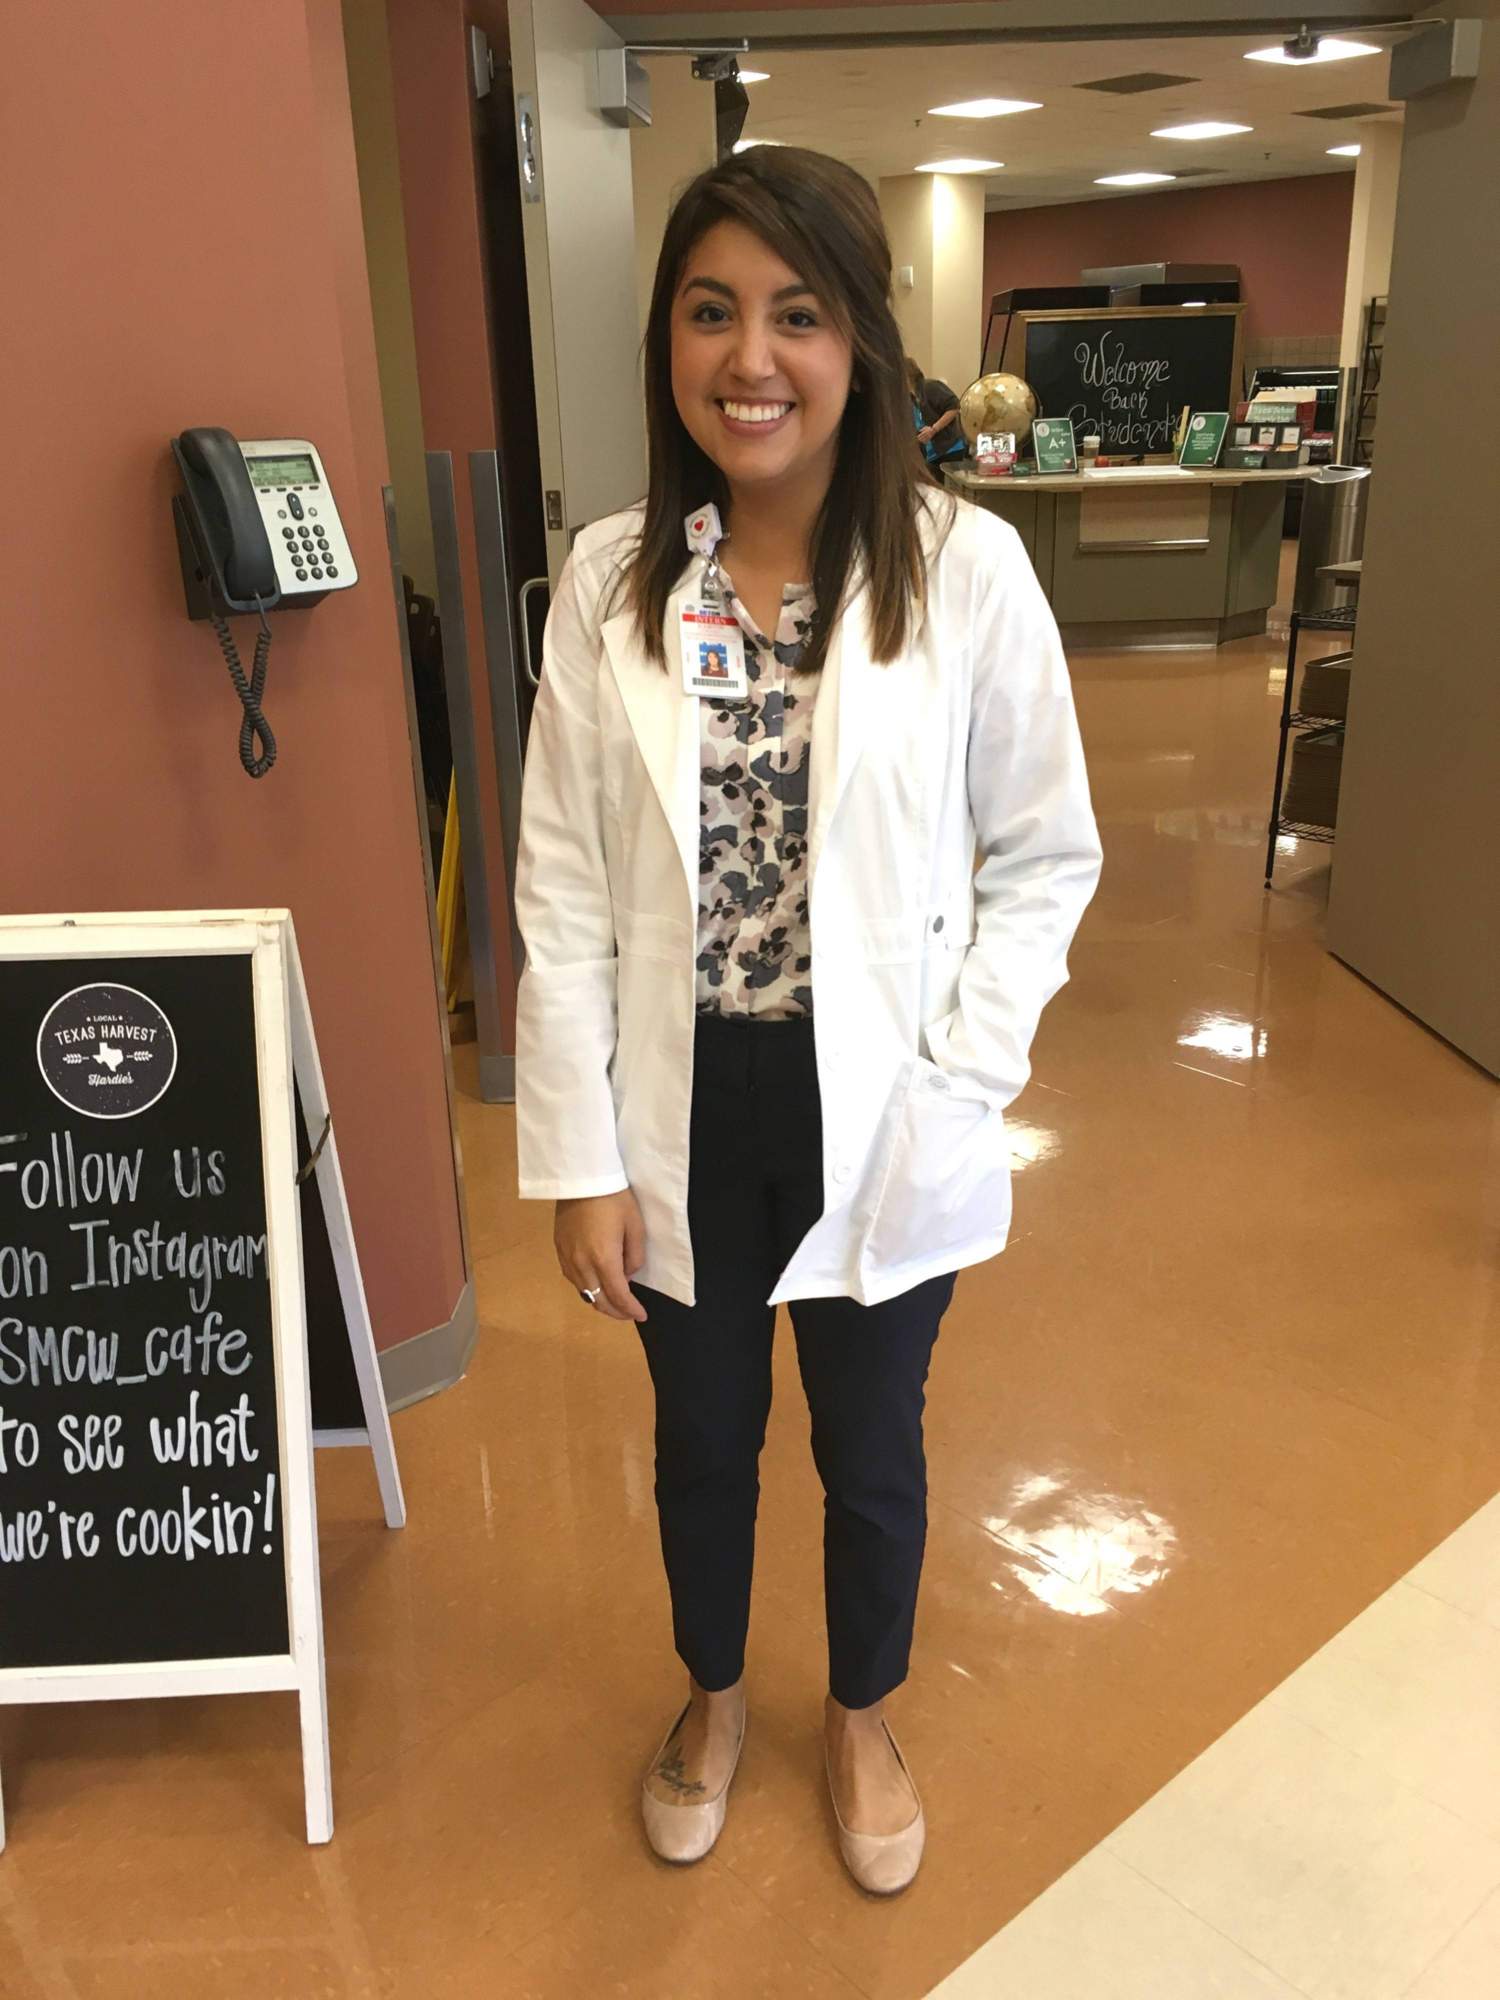 Latina woman in lab coat poses for picture in hsopital kitchen